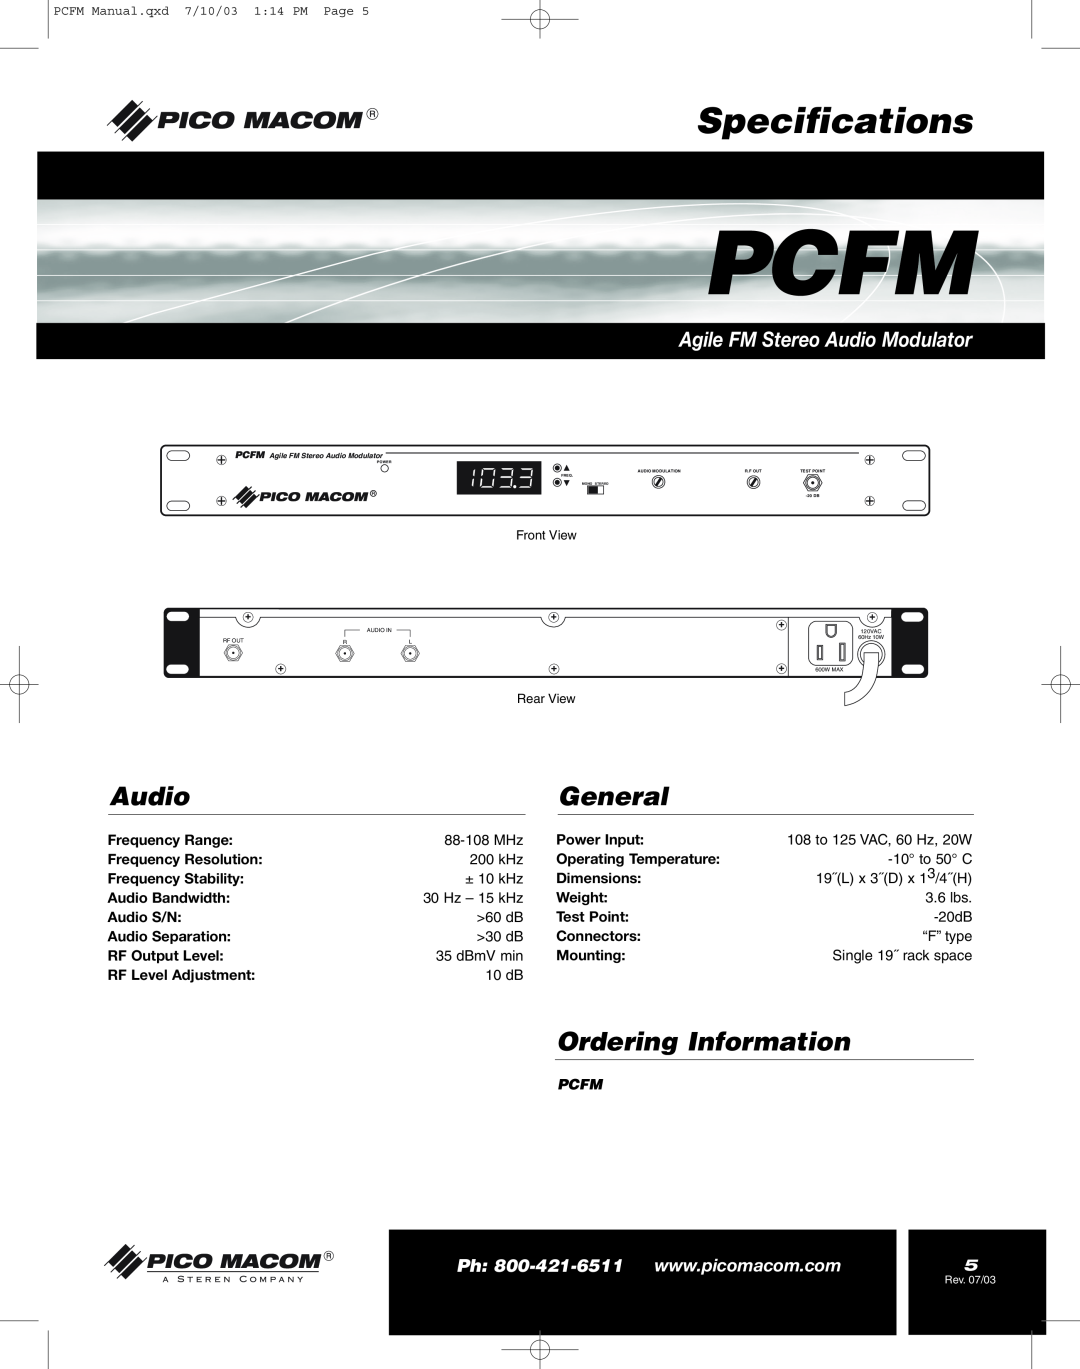 Pico Macom operation manual Specifications, Pcfm, General, Ordering Information, Agile FM Stereo Audio Modulator 